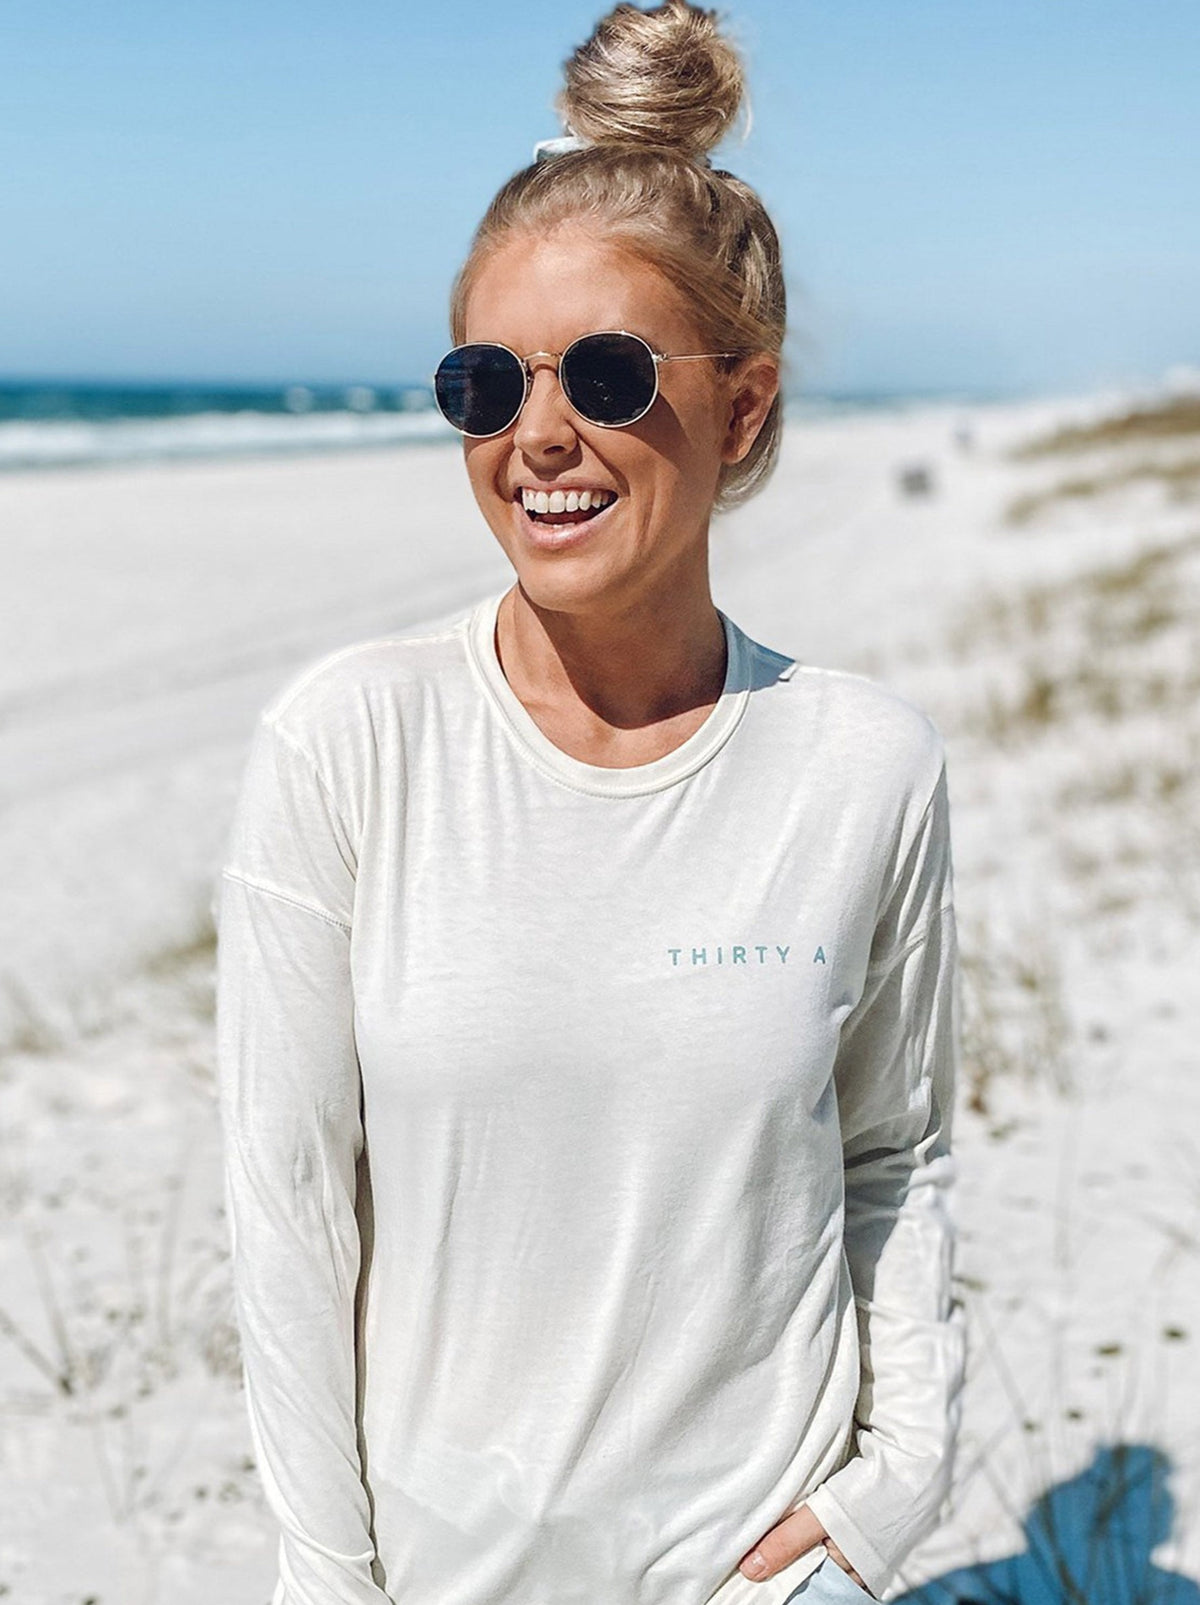 Protect our Beaches Long Sleeve T-Shirt